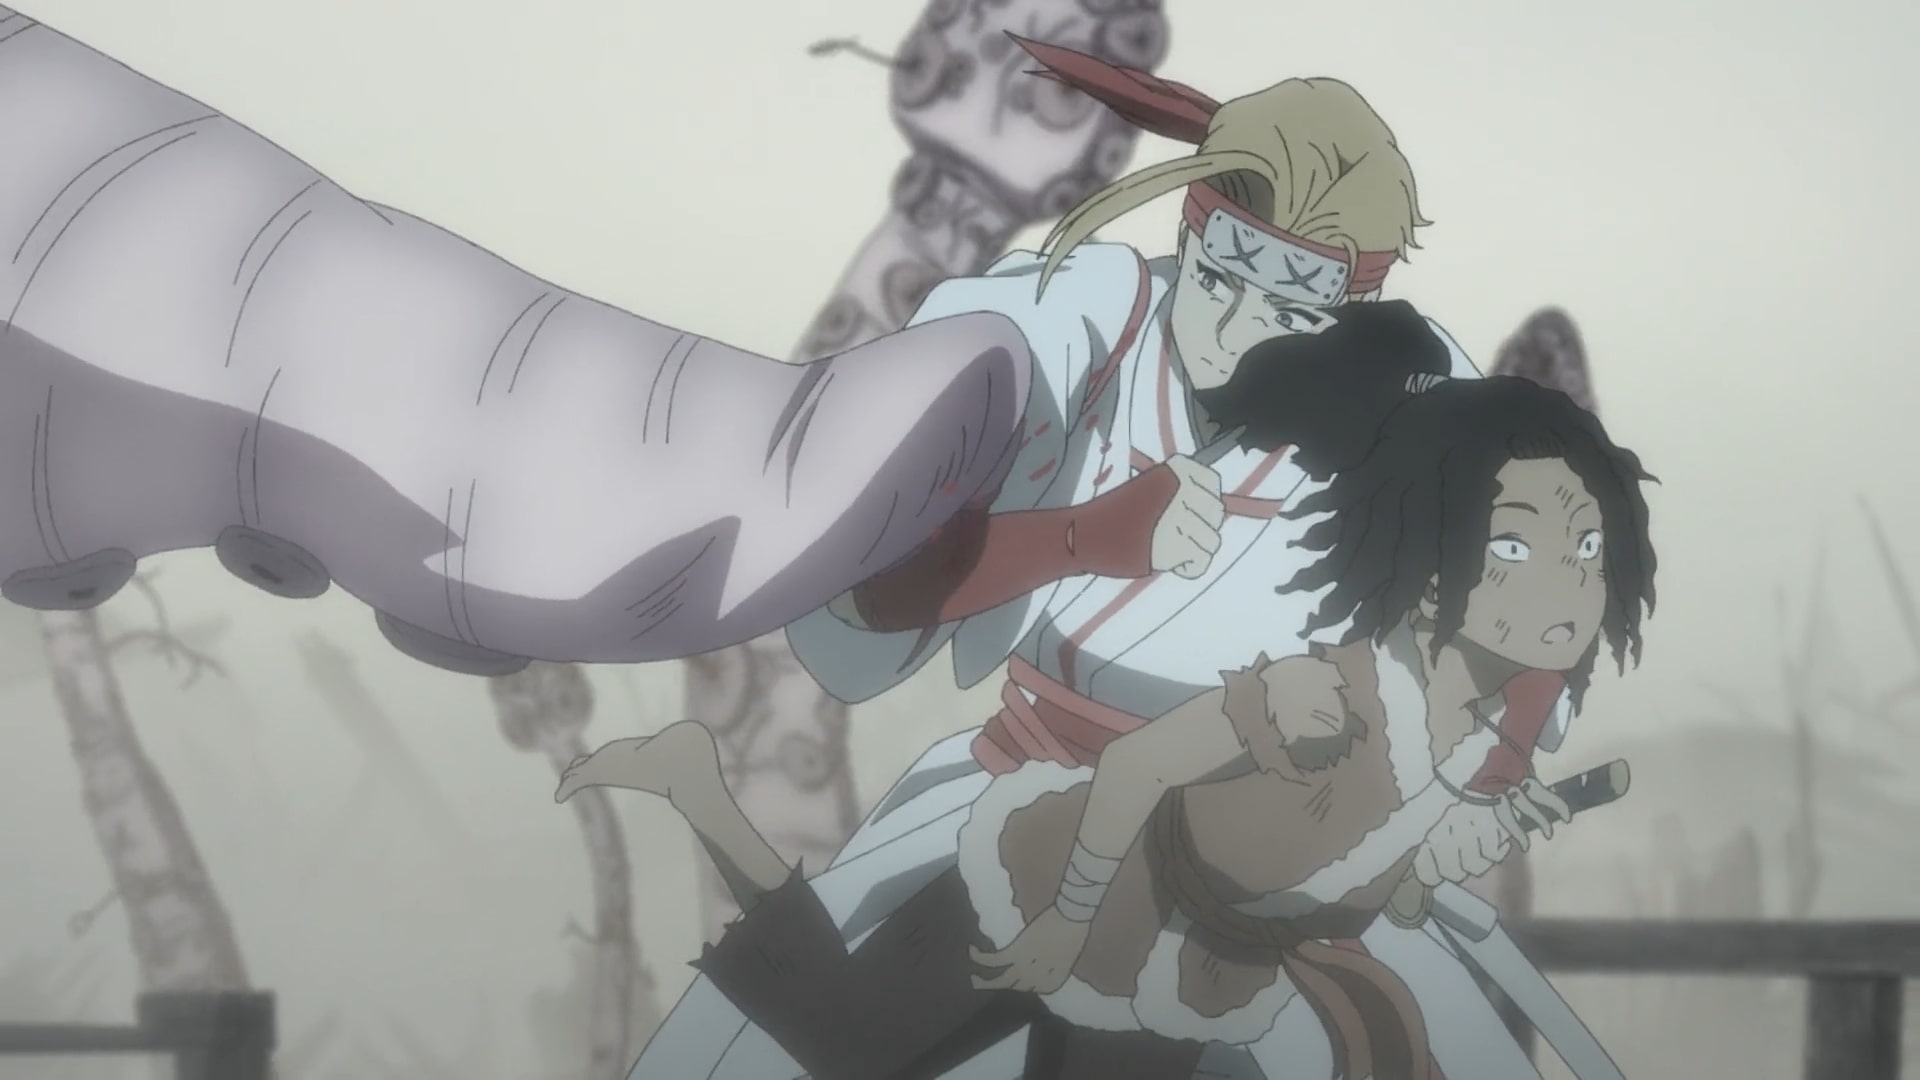 Hell's Paradise Episode 5 Recap: The Samurai and the Woman